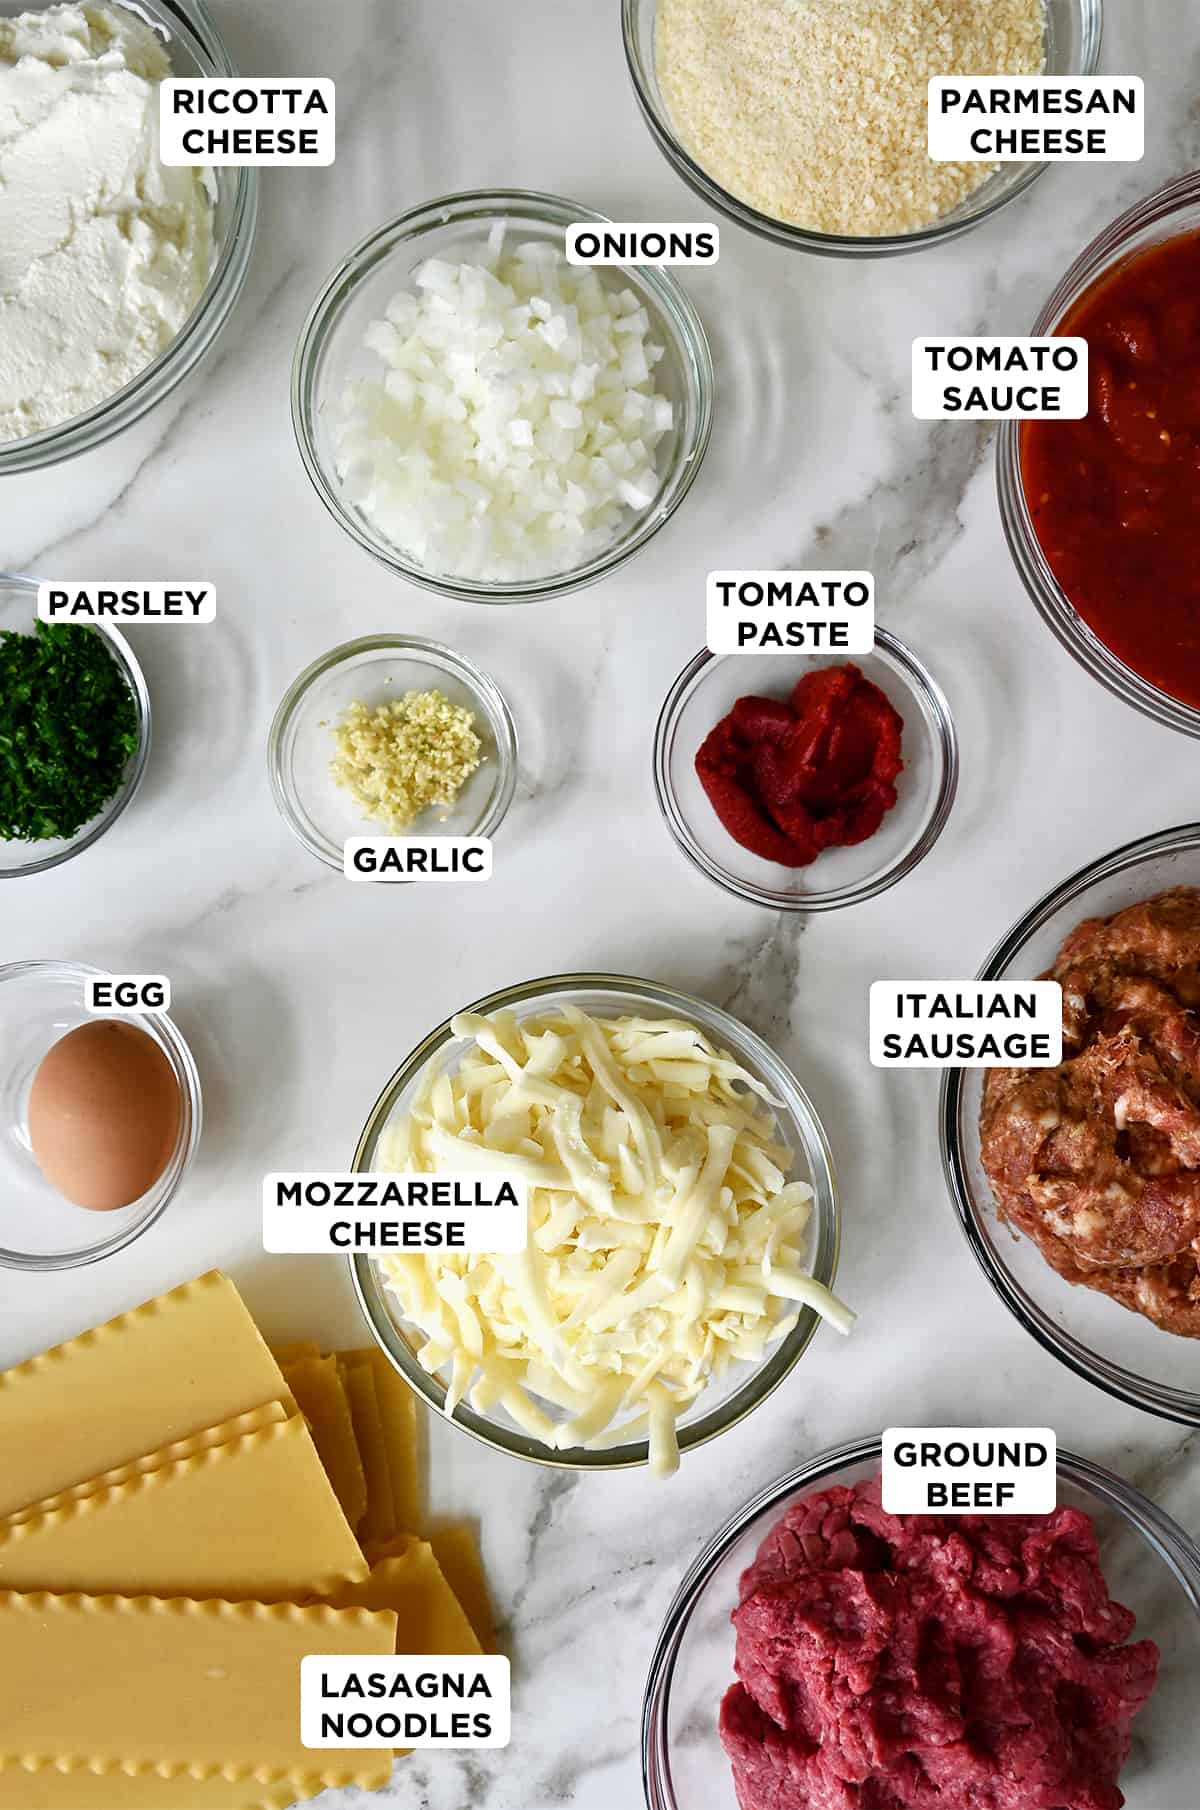 Various sizes of clear bowls containing all of the ingredients needed to make lasagna, including ricotta cheese, diced onion, Parmesan cheese, tomato sauce, tomato paste, Italian sausage, ground beef, mozzarella cheese, lasagna noodles, an egg and fresh parsley.